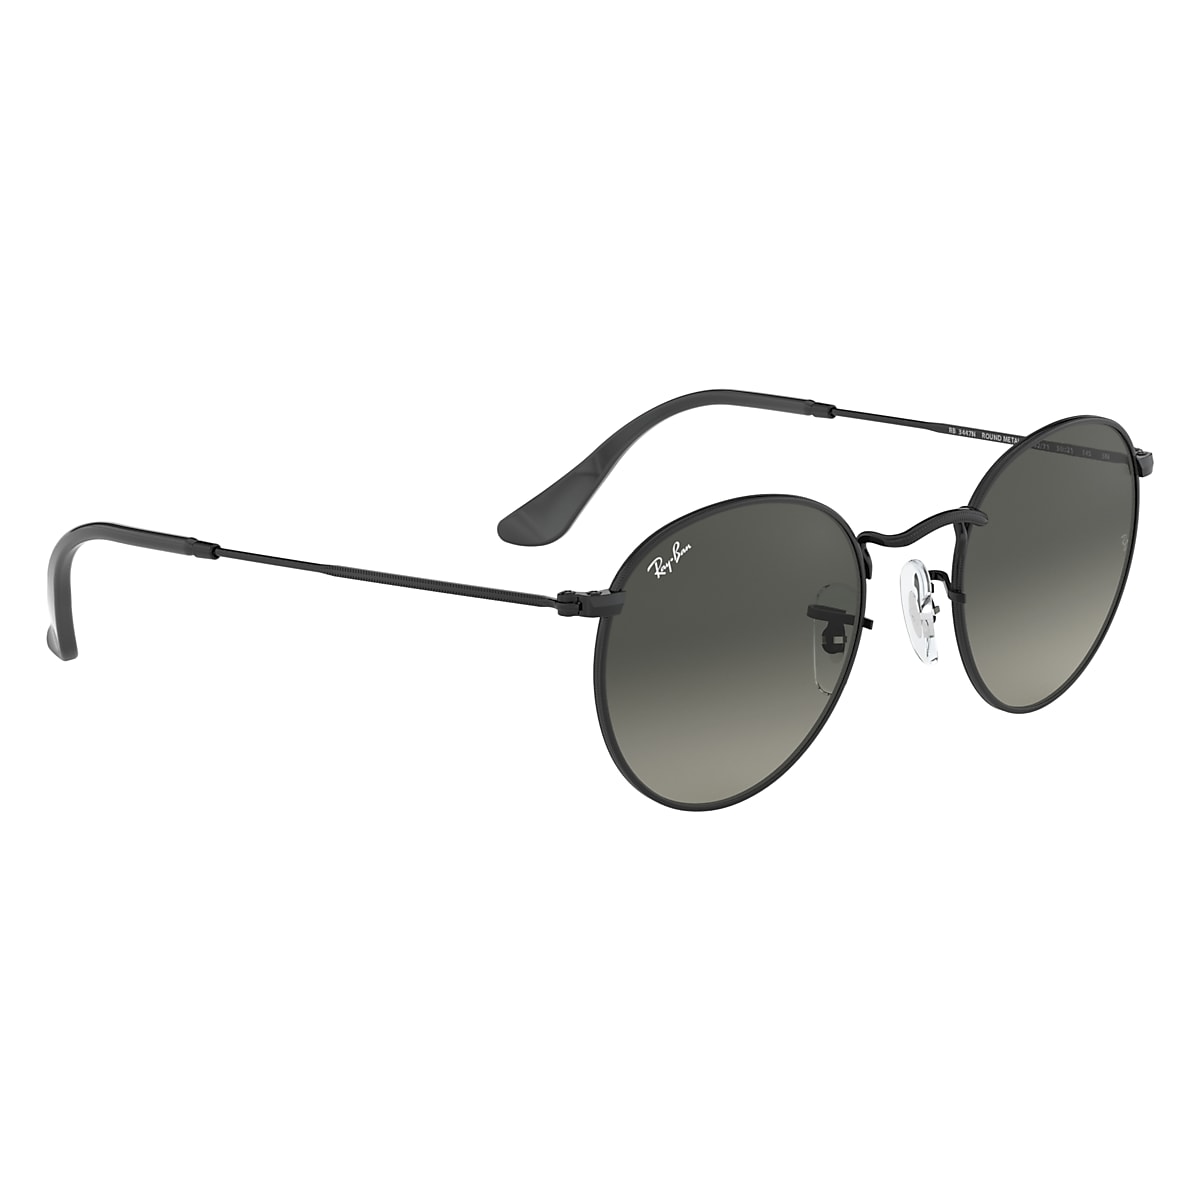 ROUND FLAT LENSES US and in RB3447N | Sunglasses - Black Ray-Ban® Grey